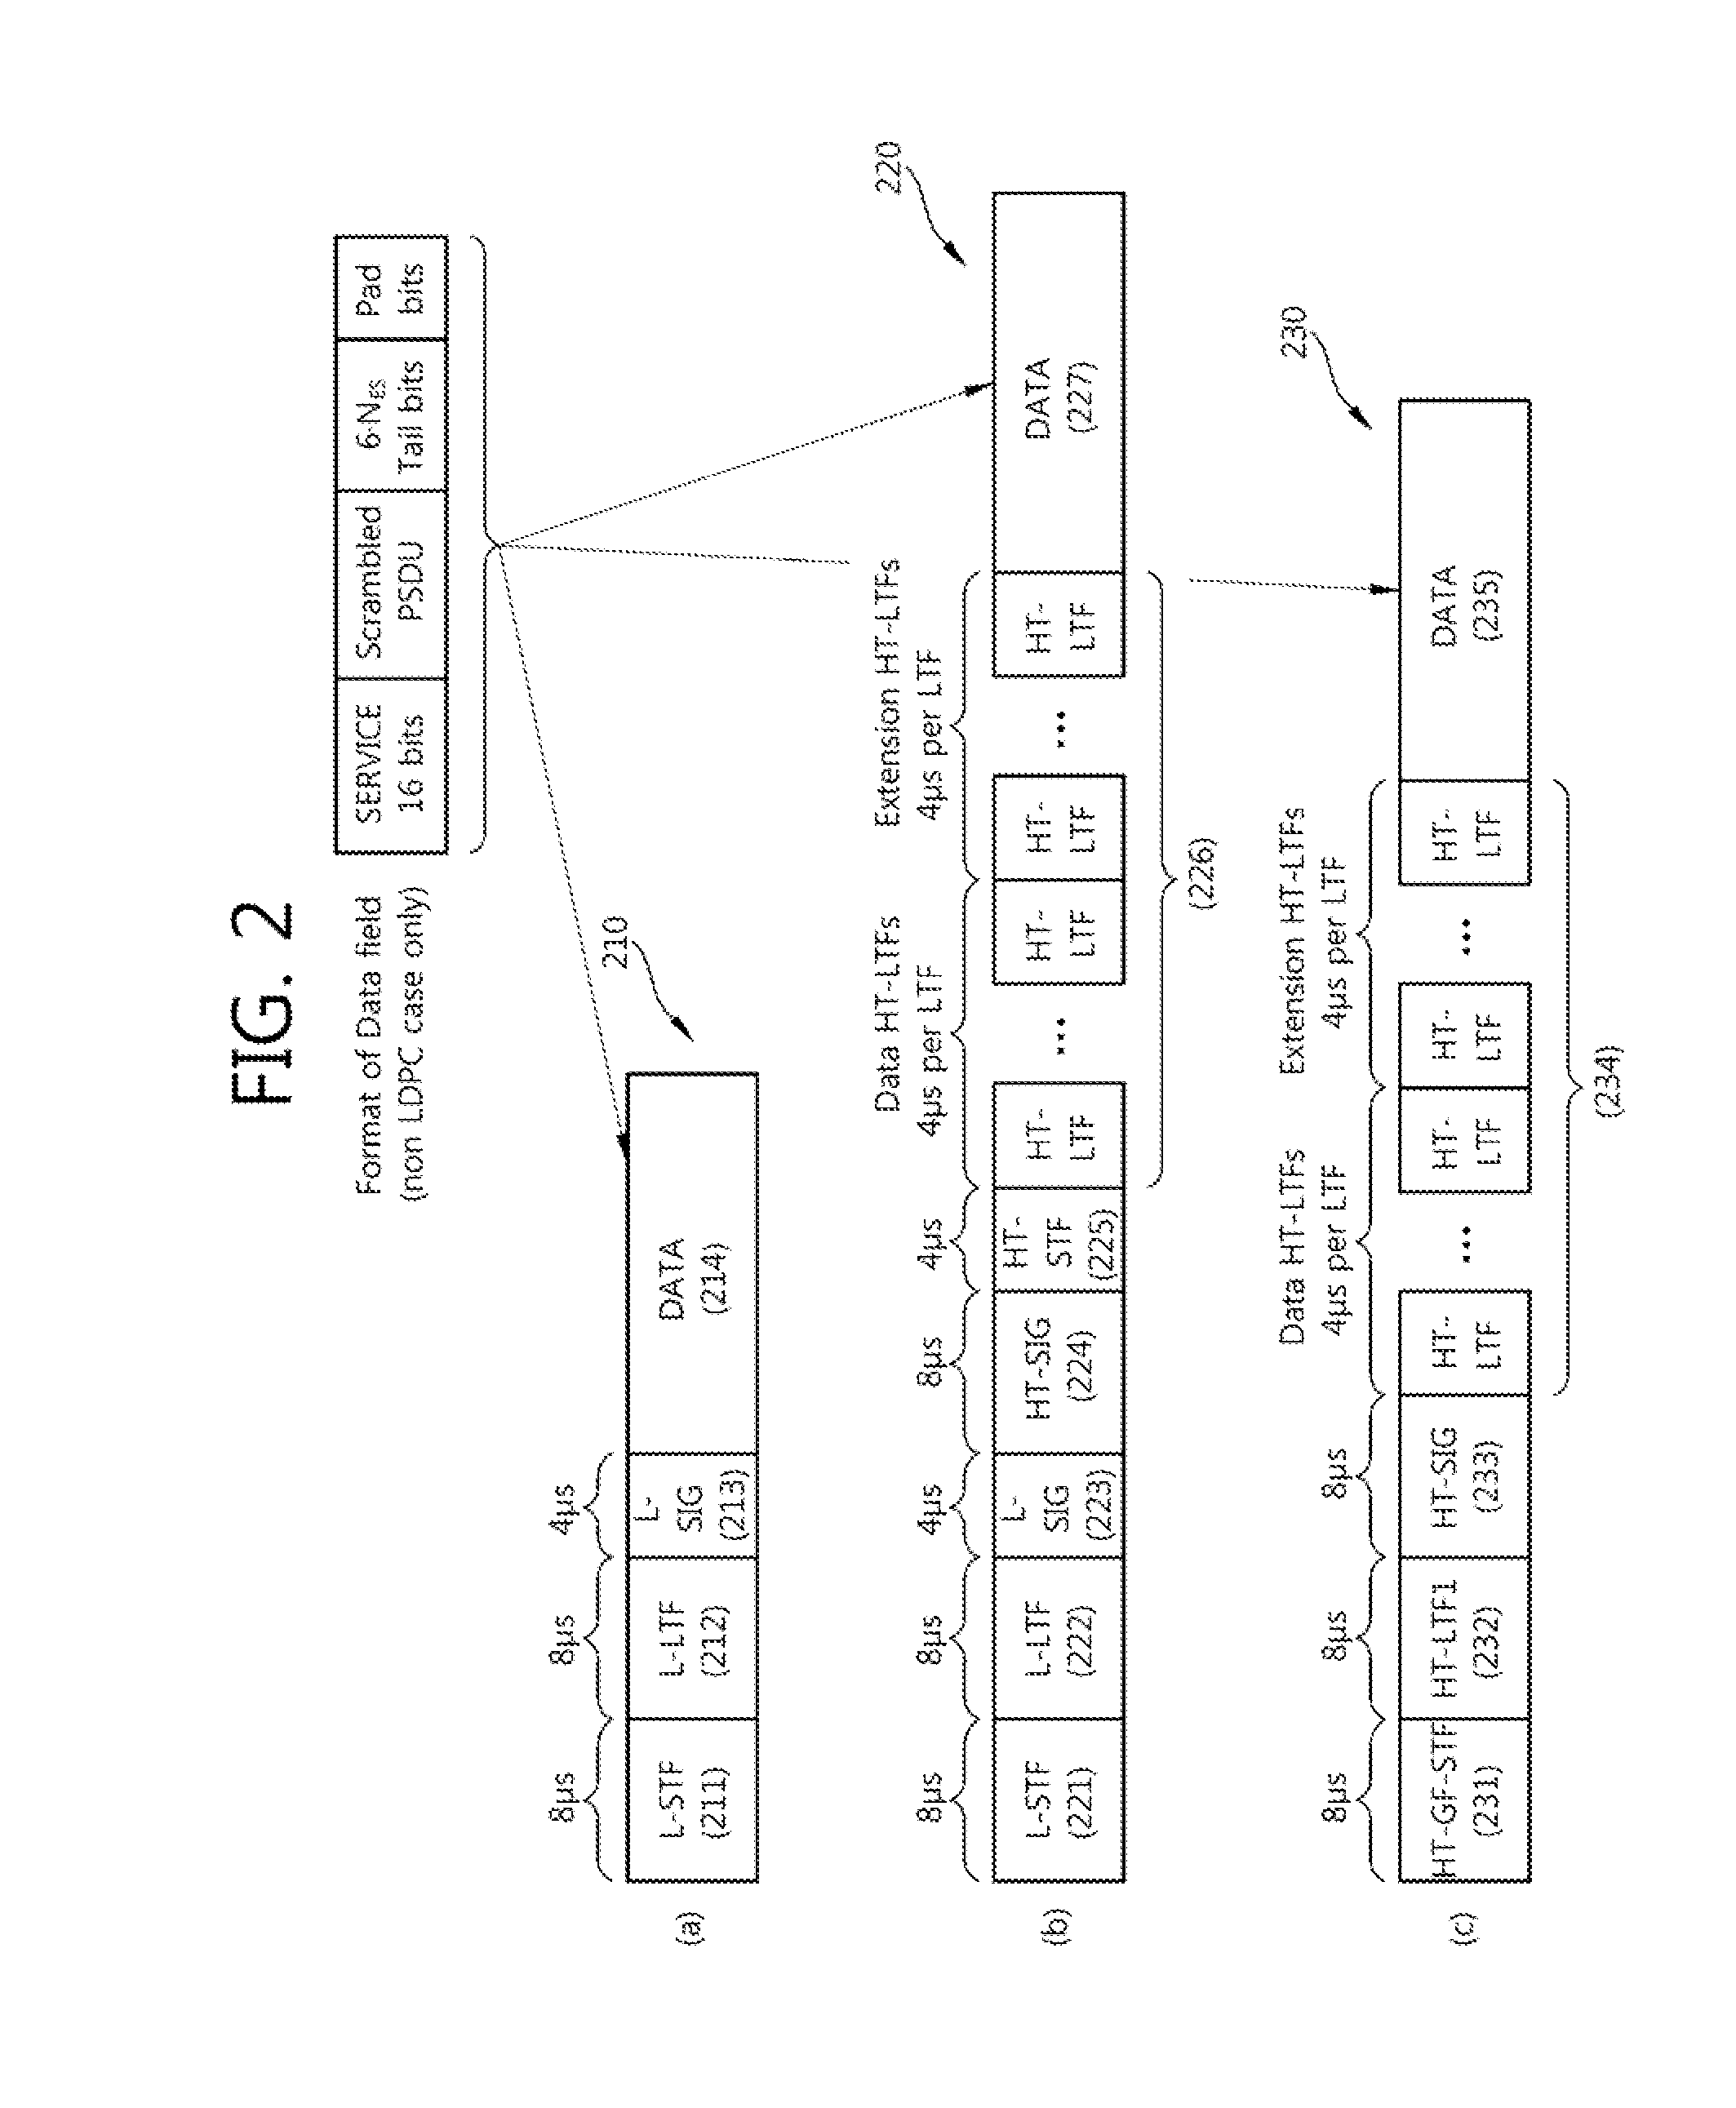 Ppdu receiving method and apparatus based on the MIMO technique in a WLAN system